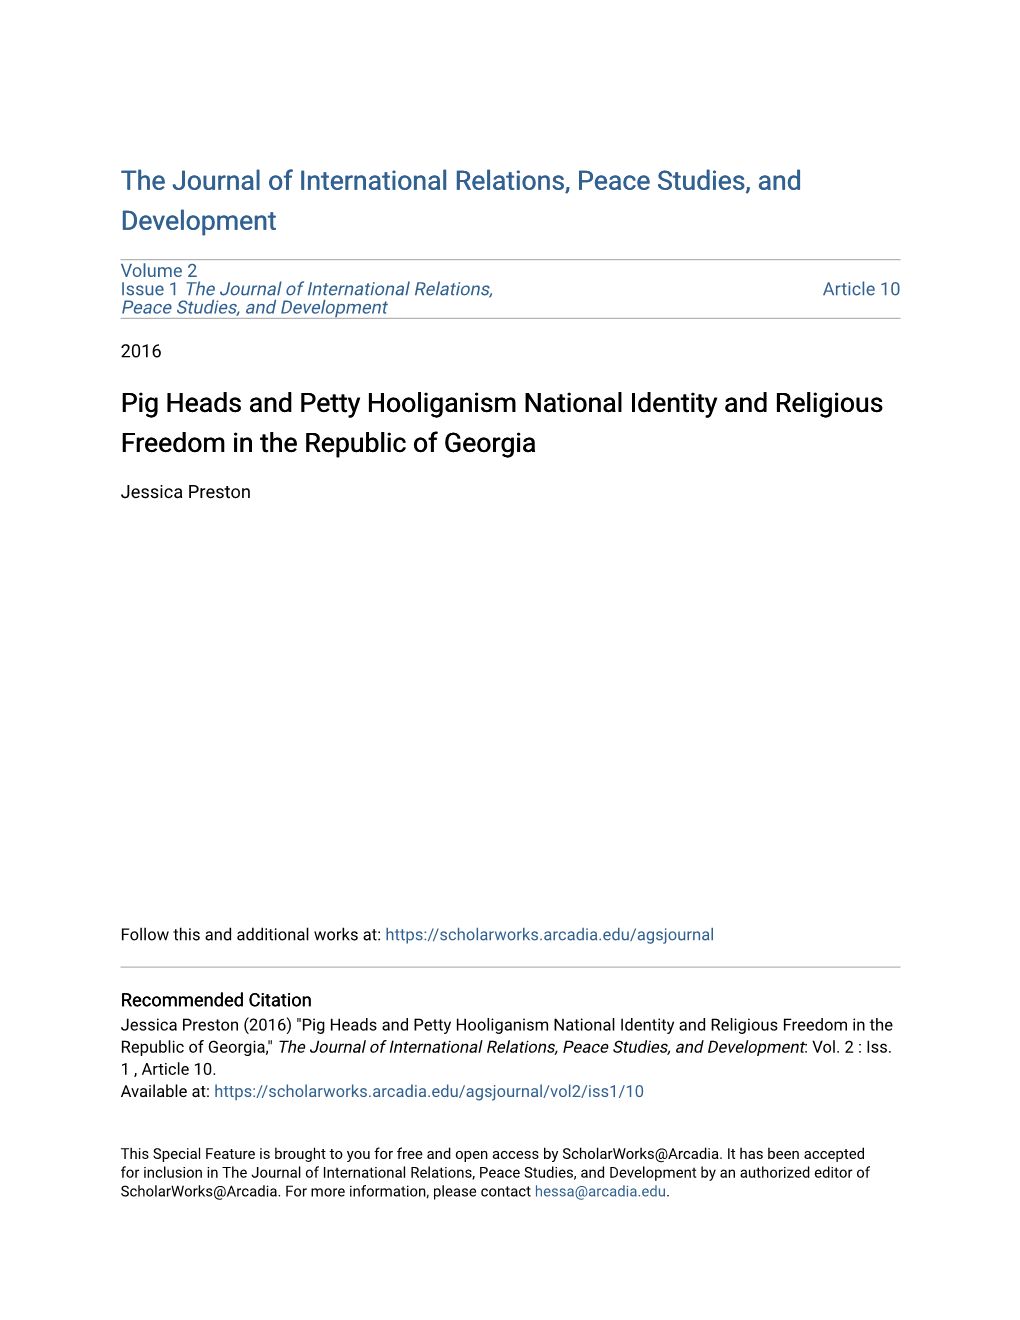 Pig Heads and Petty Hooliganism National Identity and Religious Freedom in the Republic of Georgia